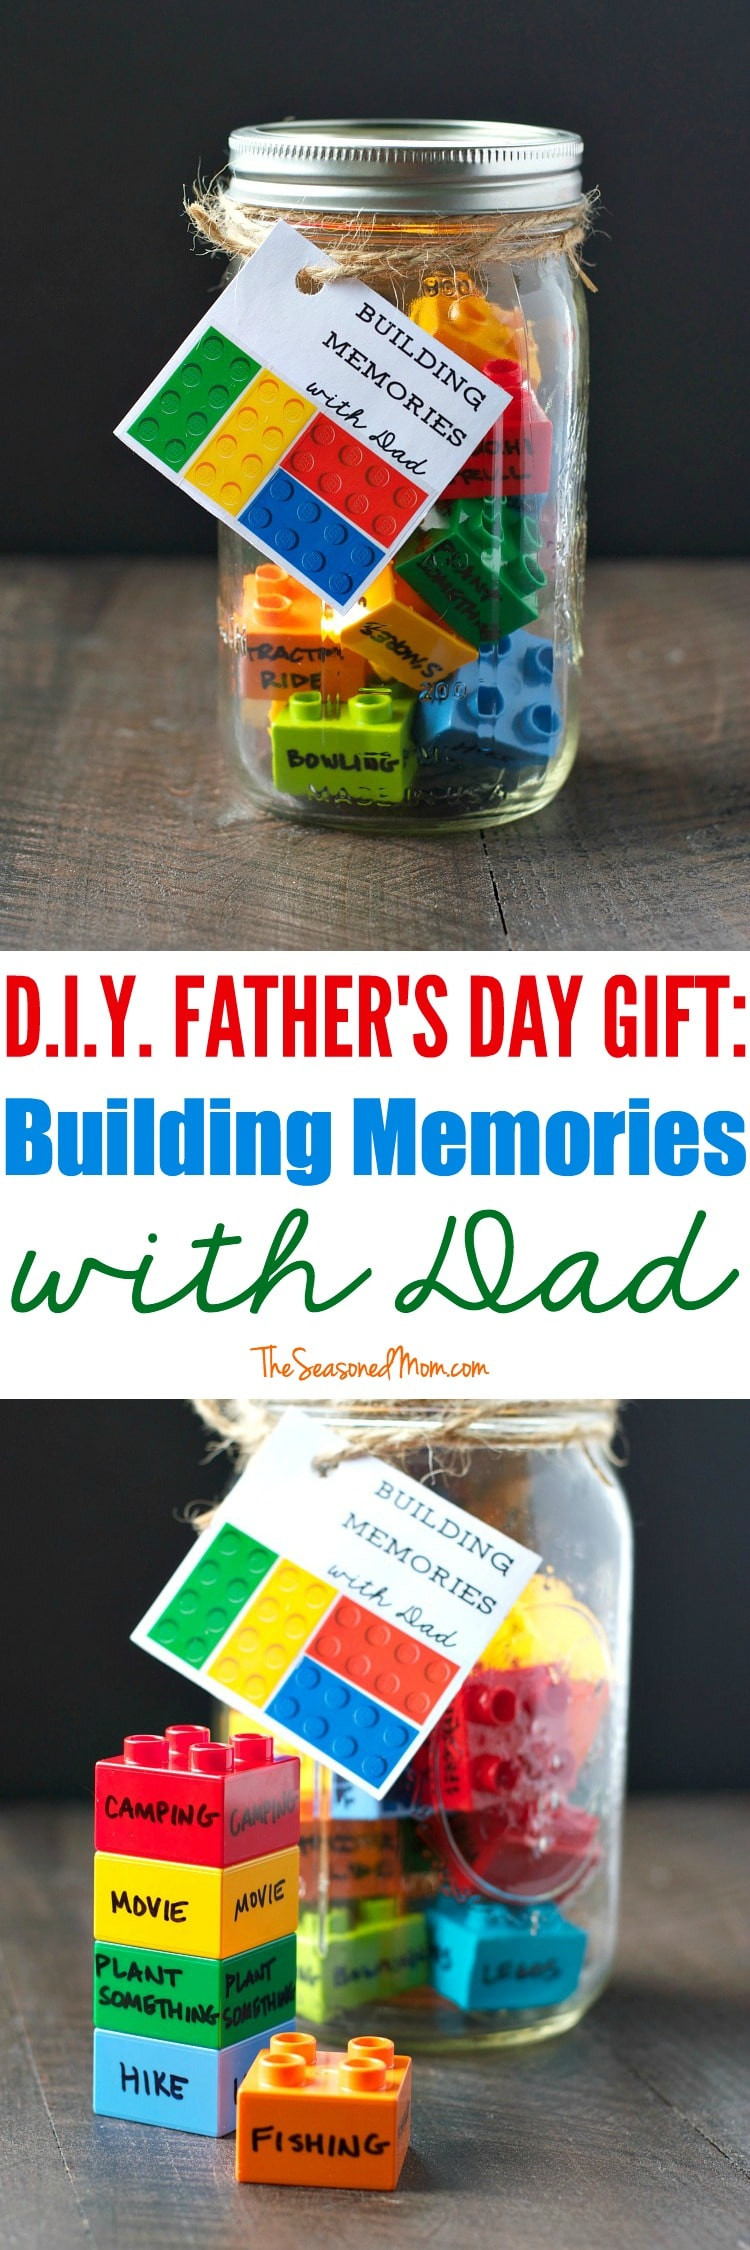 Diy Fathers Day Presents
 25 Homemade Father s Day Gifts from Kids That Dad Can